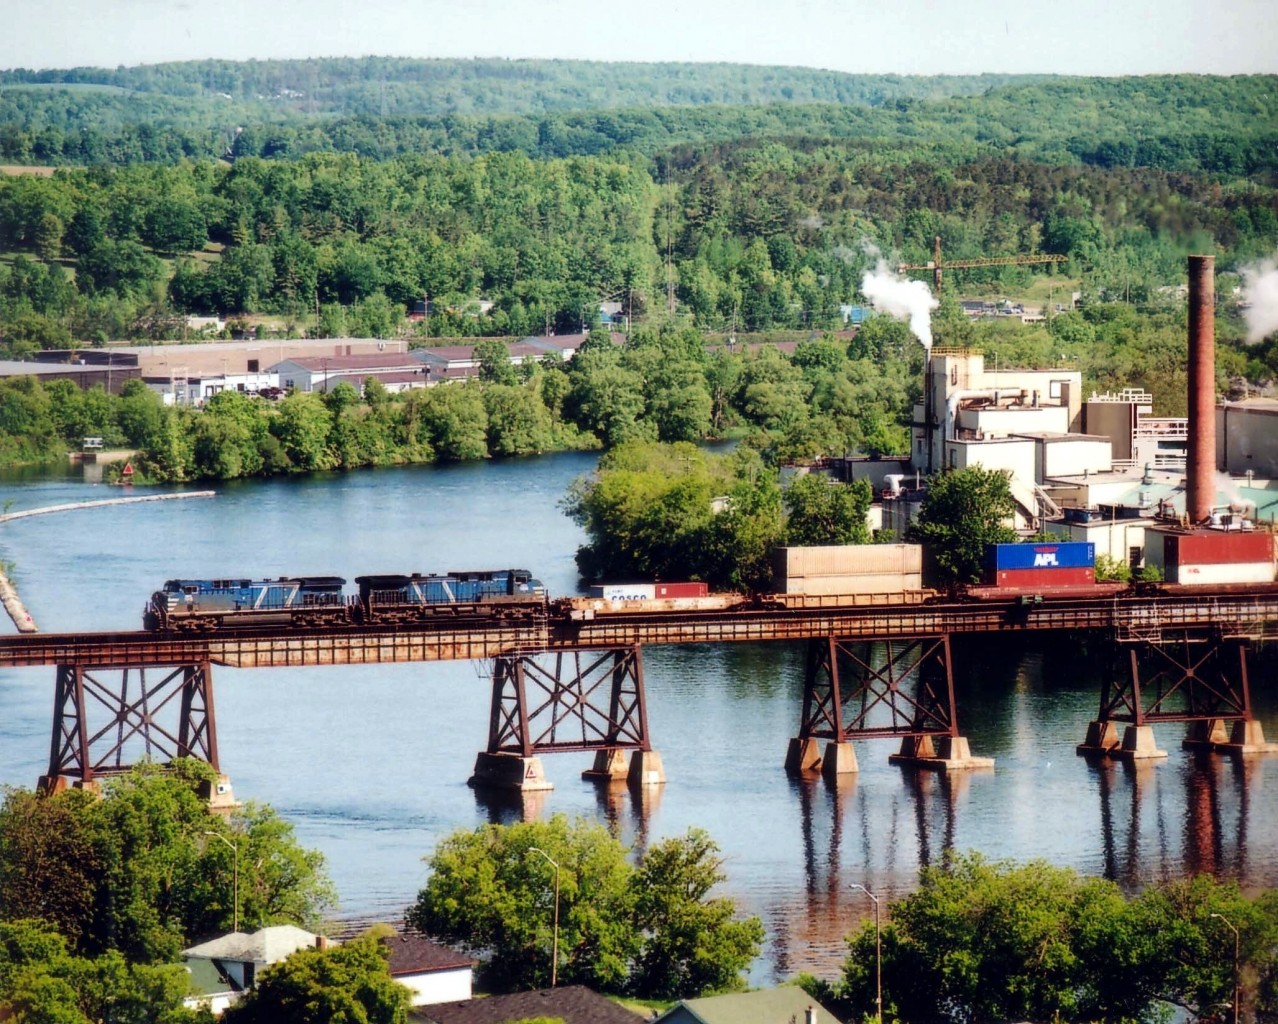 The view at the big CP bridge over the Trent River in Trenton, Ontario is well known, but the even broader view from Mount Pelion is not.  Here is a 'panoramic' shot of a matched pair of long-term lease CEFX AC4400CW units  westbound over the trestle with general freight in tow.